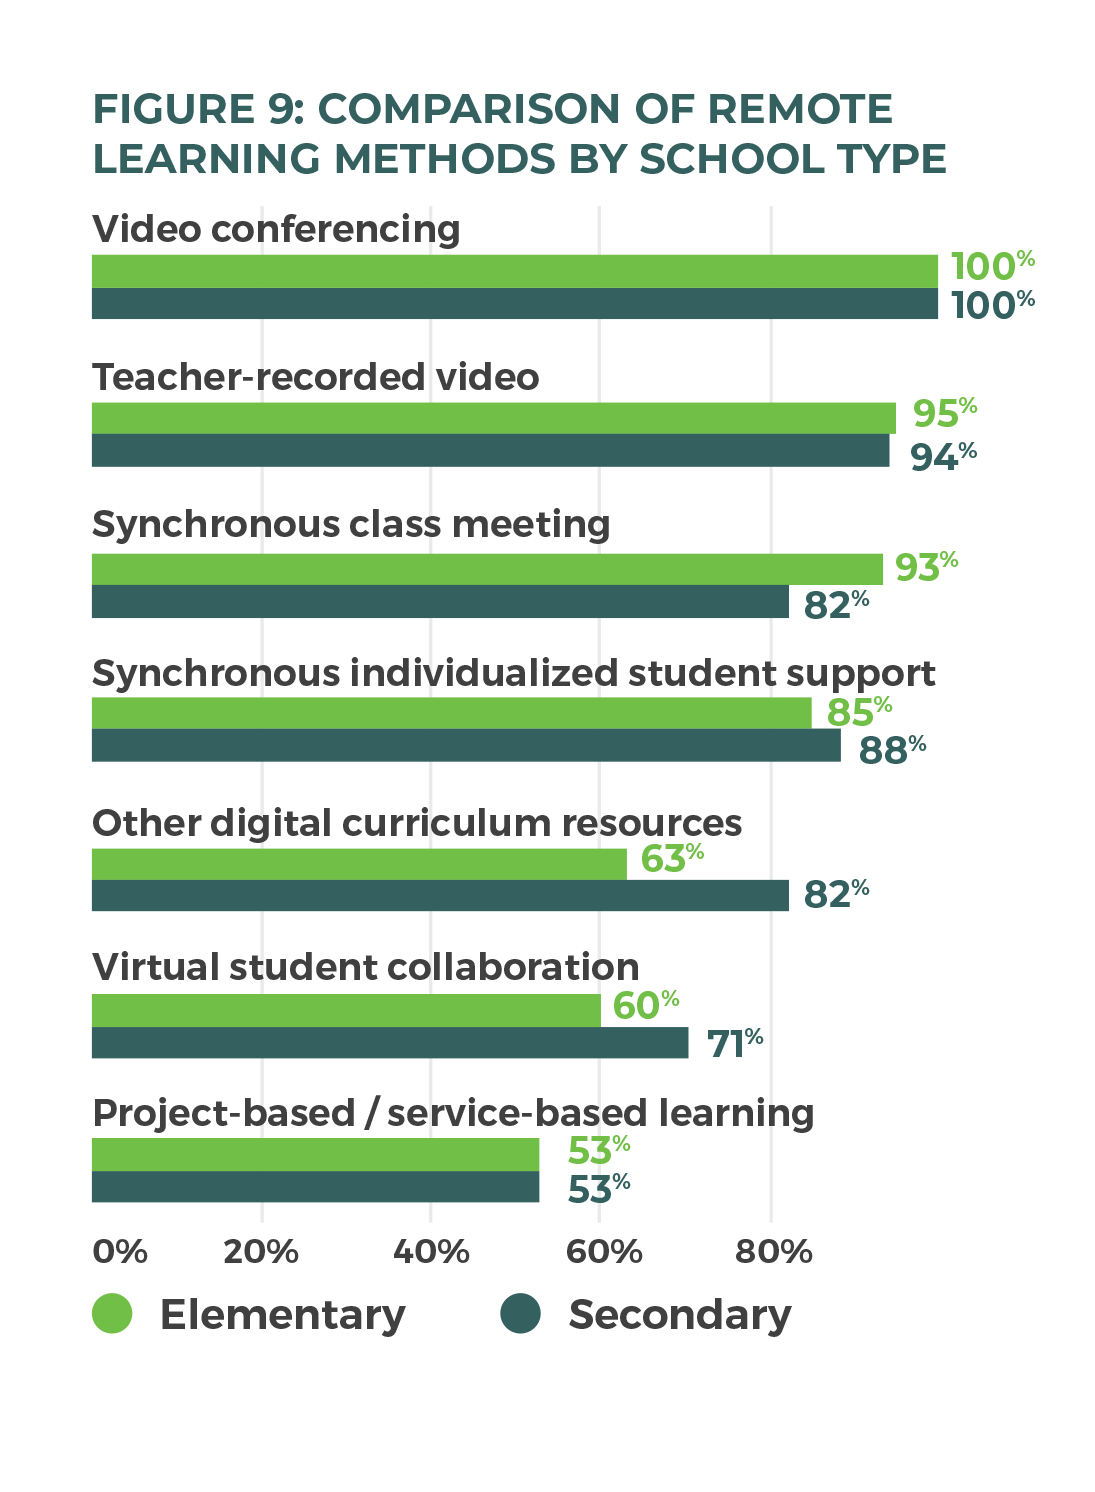 Figure 9: Comparison of remote learning methods by school type (based on the highest number of schools in elementary and secondary levels)